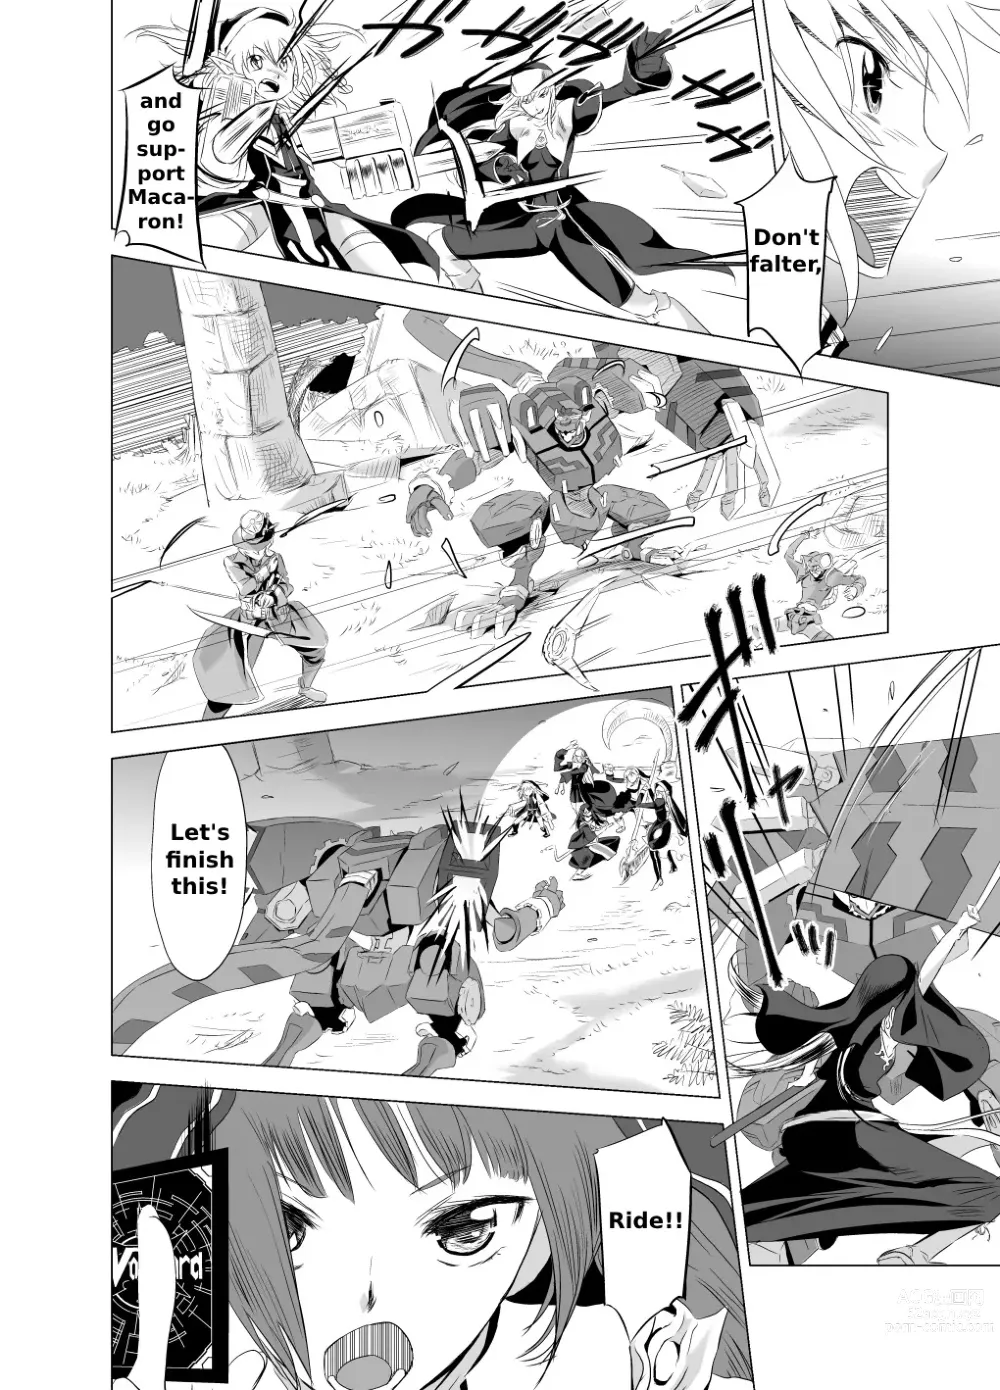 Page 4 of doujinshi 2nd RIDE -Battle Sister crisiS-